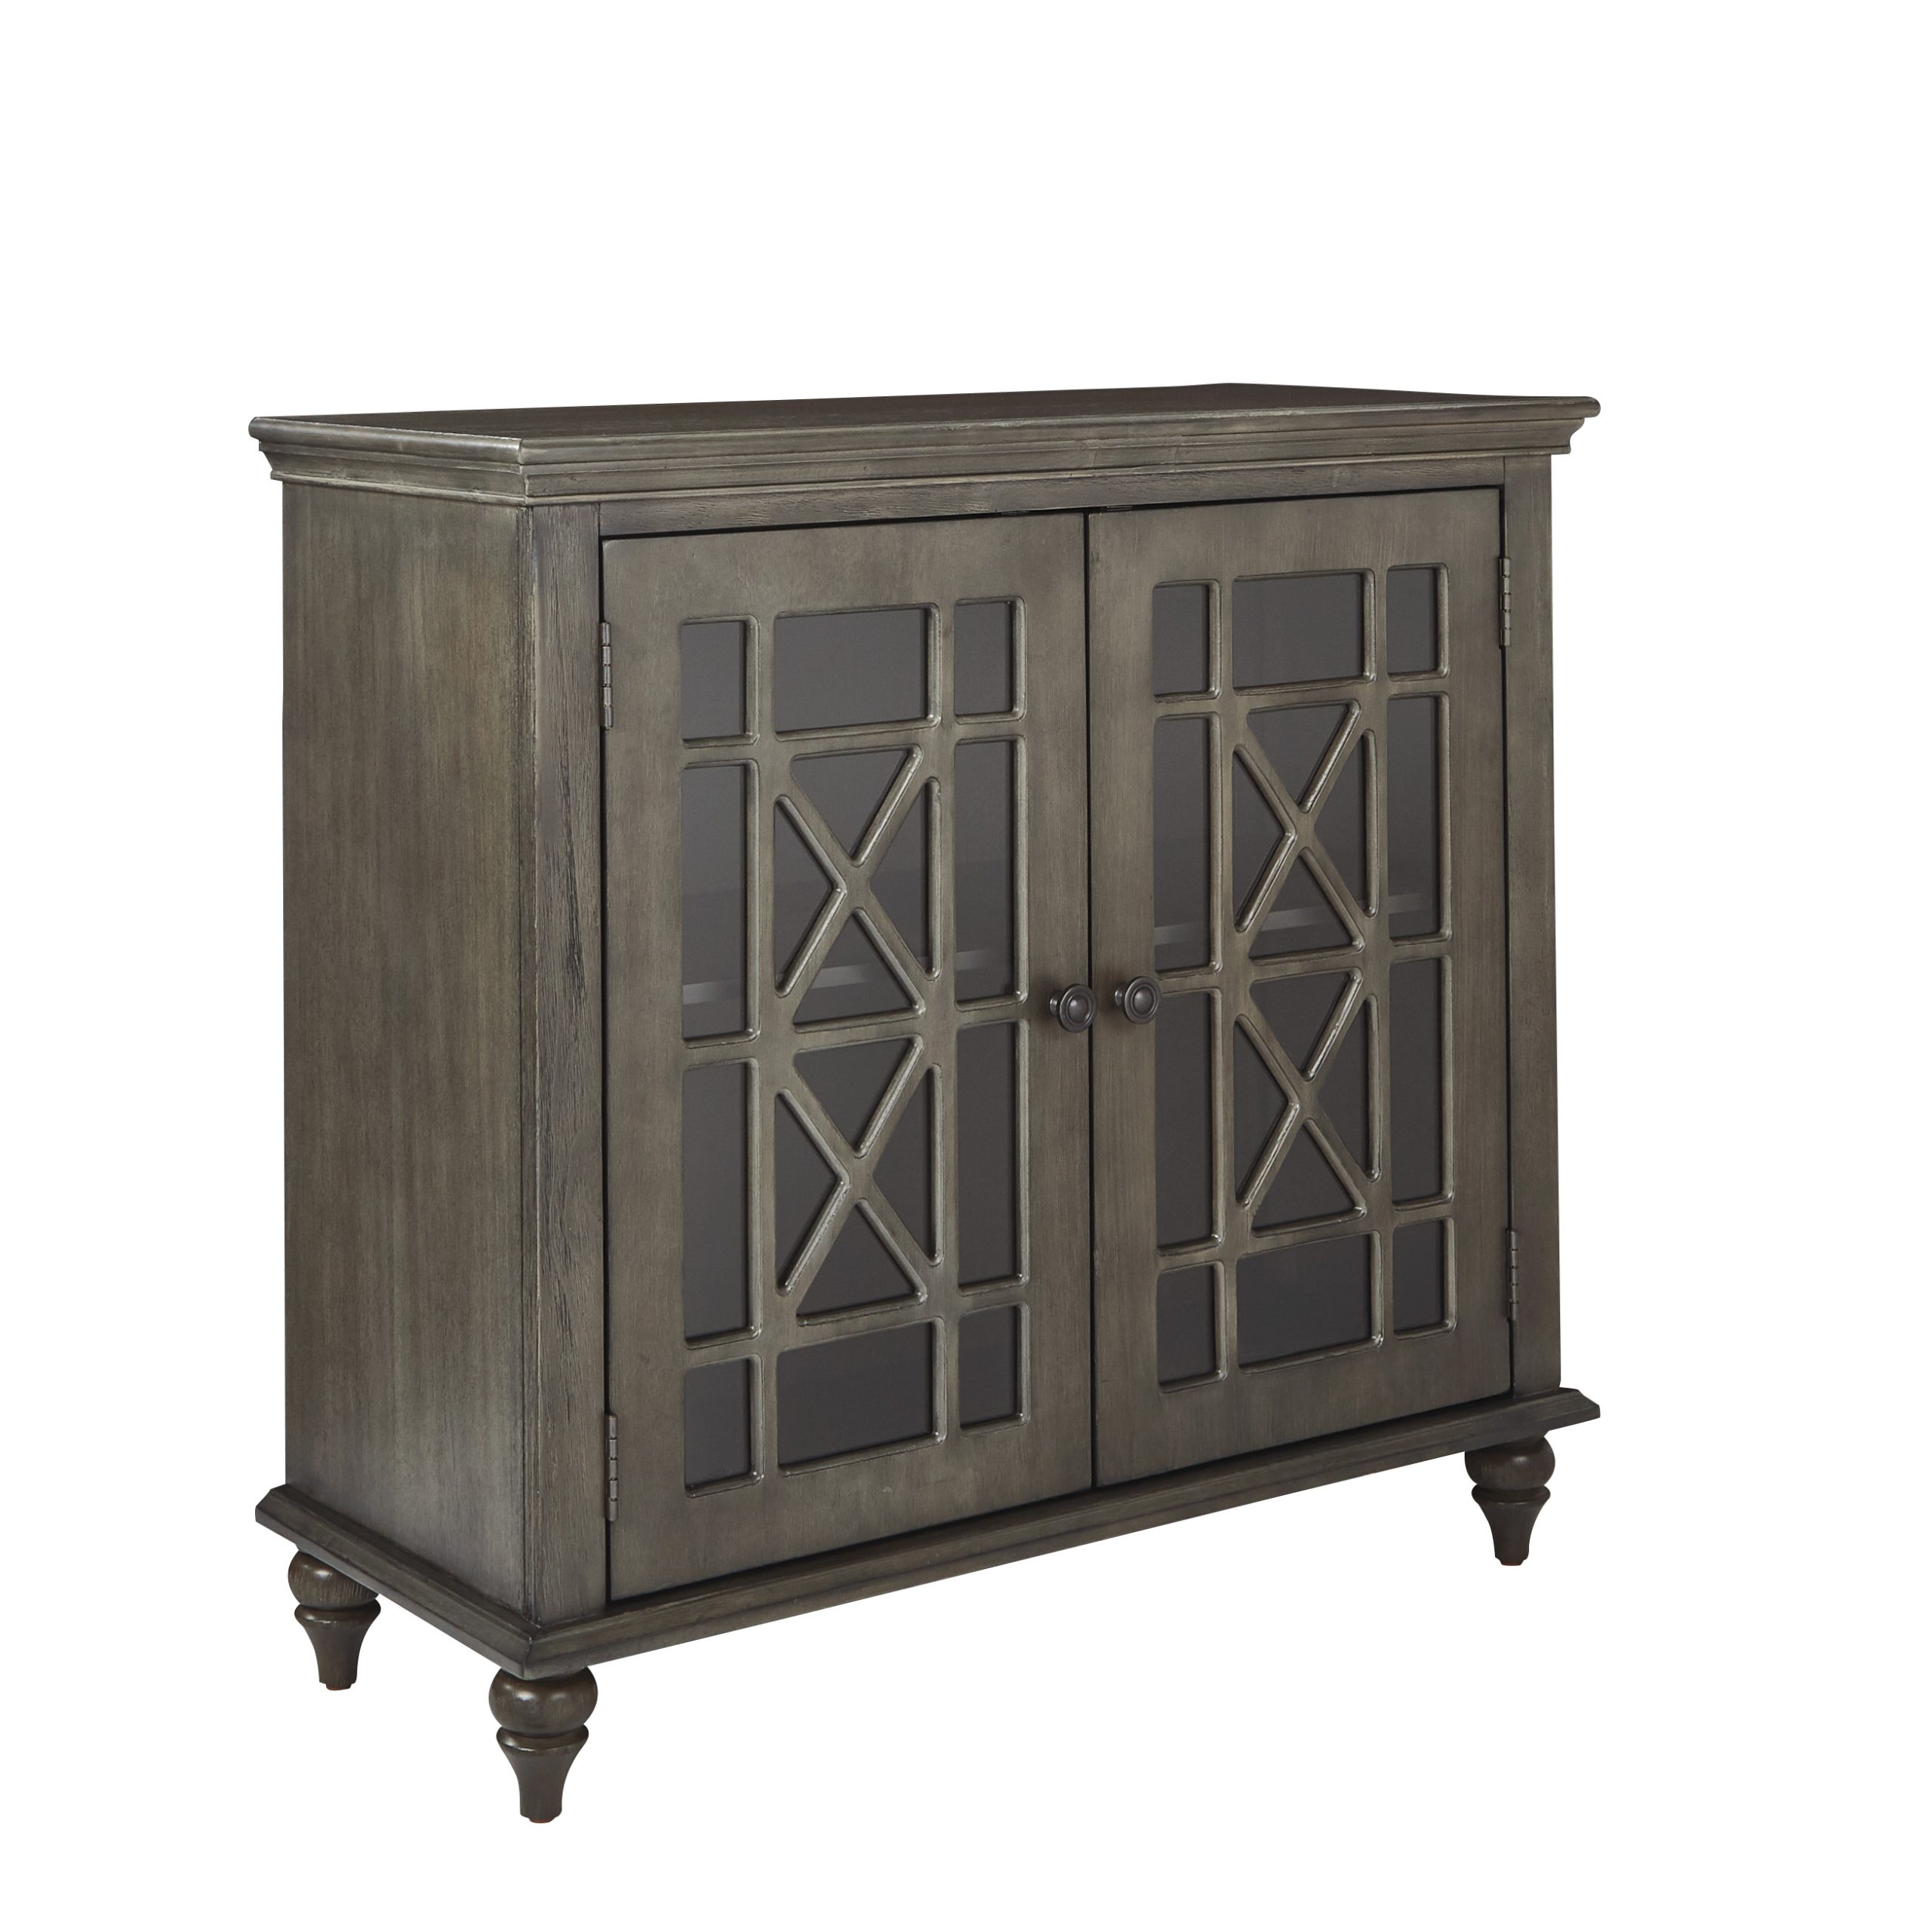 Shelton Storage Console in Antique Grey Finish ASM INSPIRED by Bassett ...